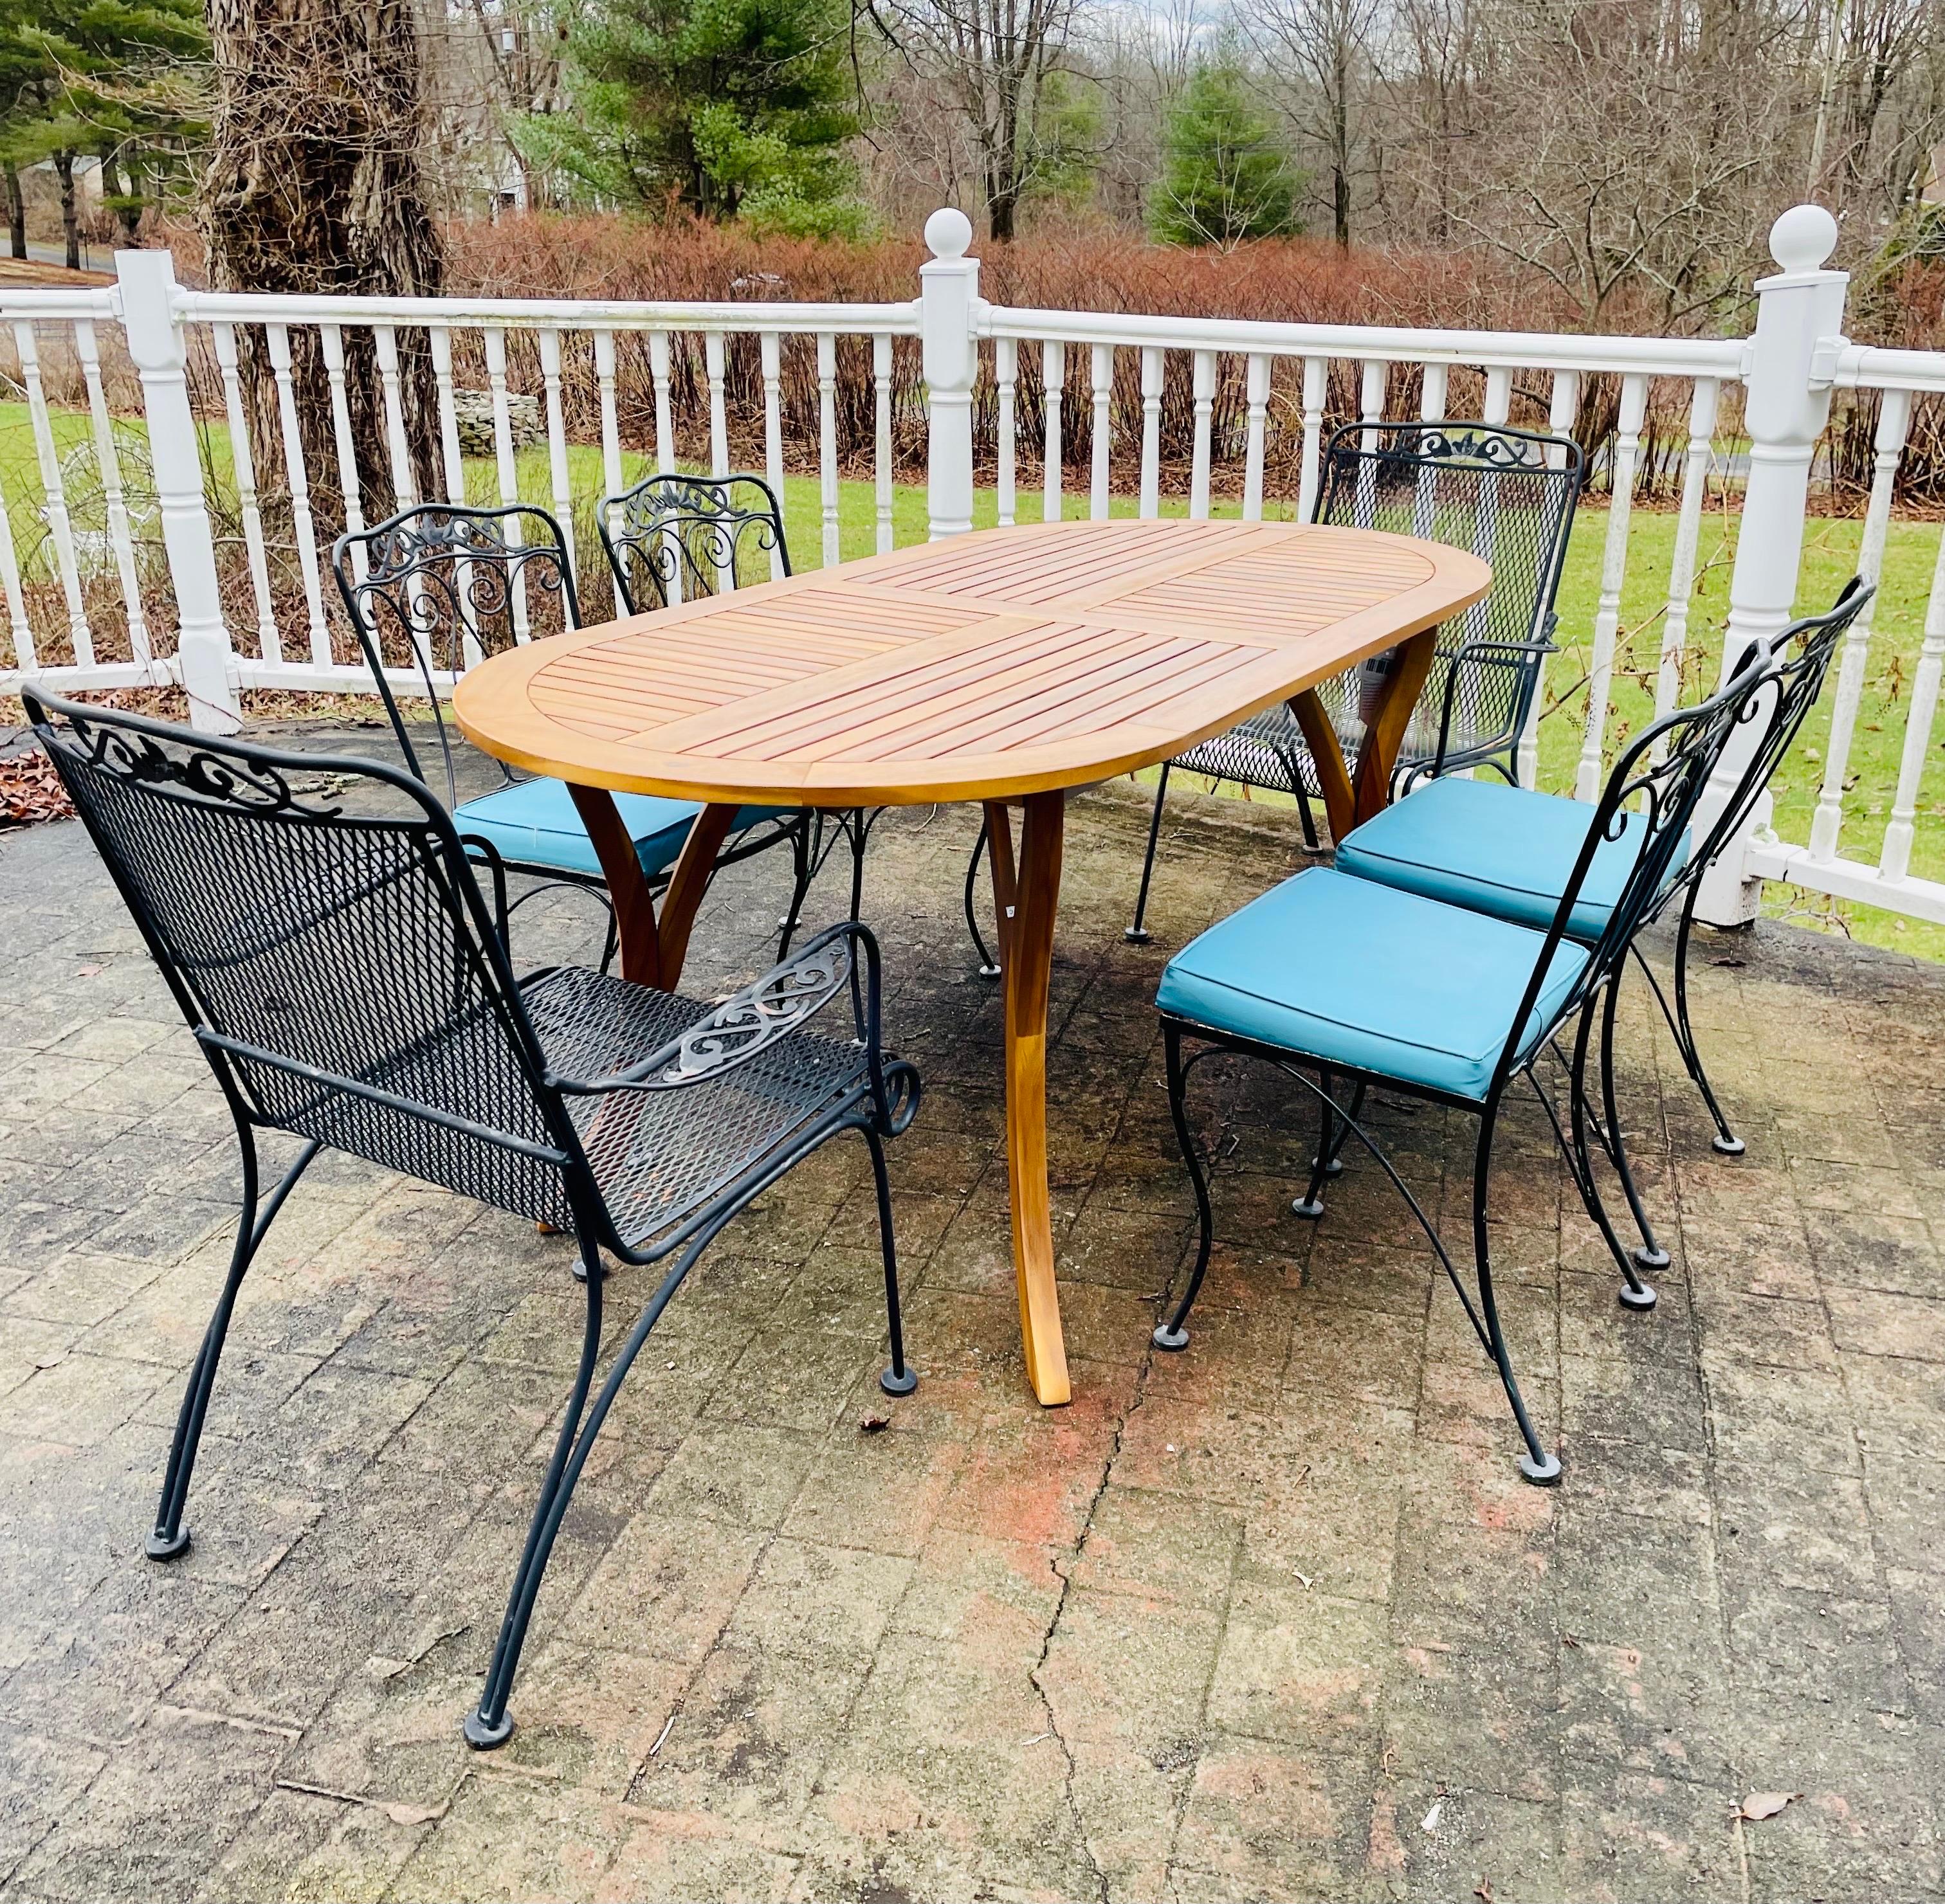 Mid-Century Modern Vintage Wrought Iron Patio Furniture Seating Chairs with Teak Table For Sale